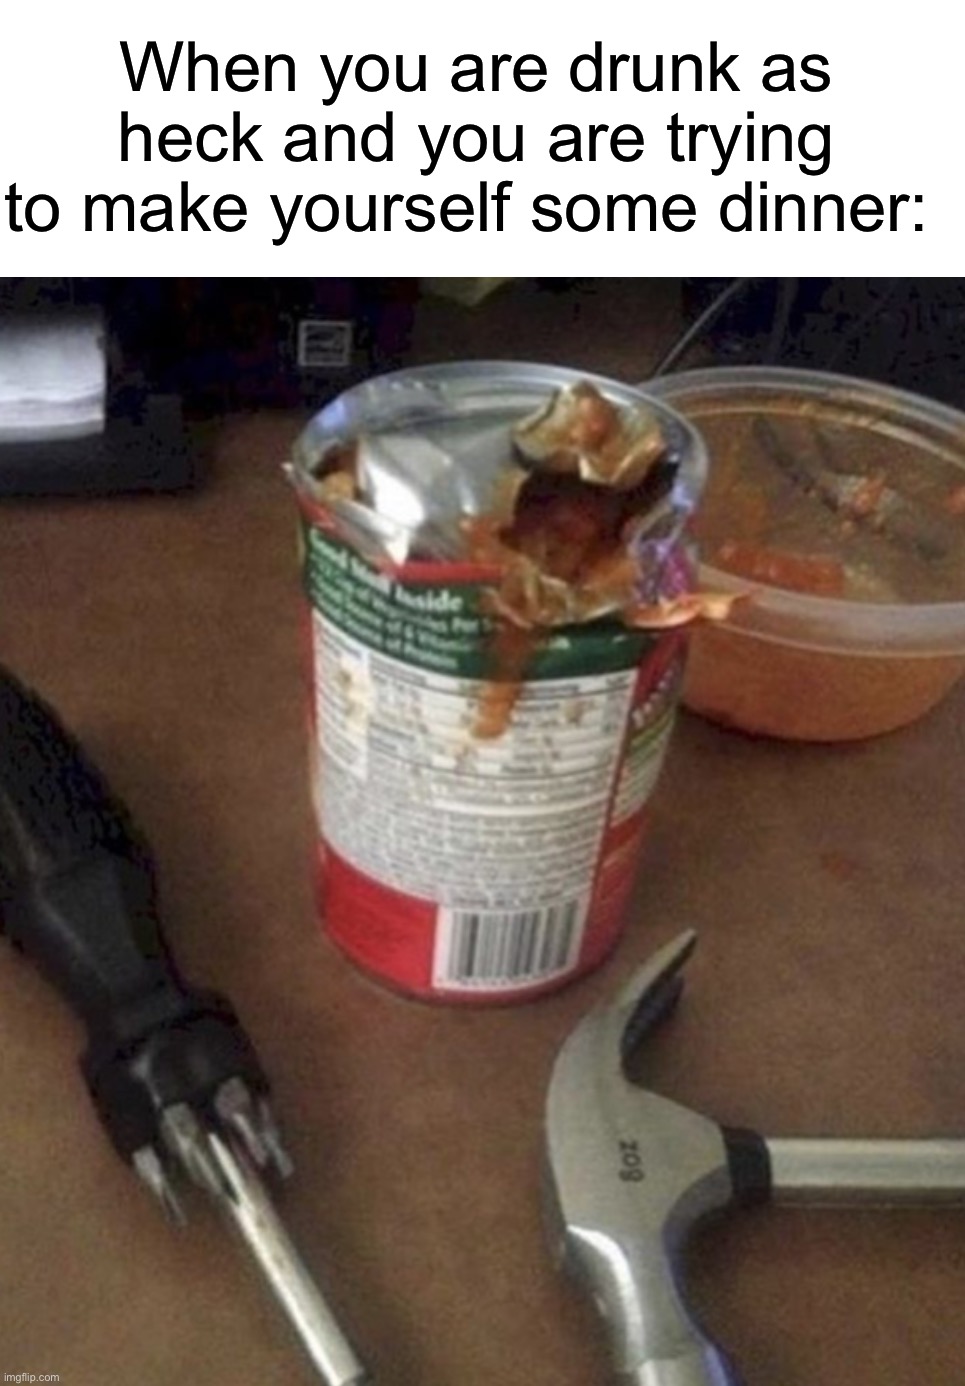 Dear god…he masticated it | When you are drunk as heck and you are trying to make yourself some dinner: | image tagged in memes,funny,wtf,hold up,wait what,hold up wait a minute something aint right | made w/ Imgflip meme maker